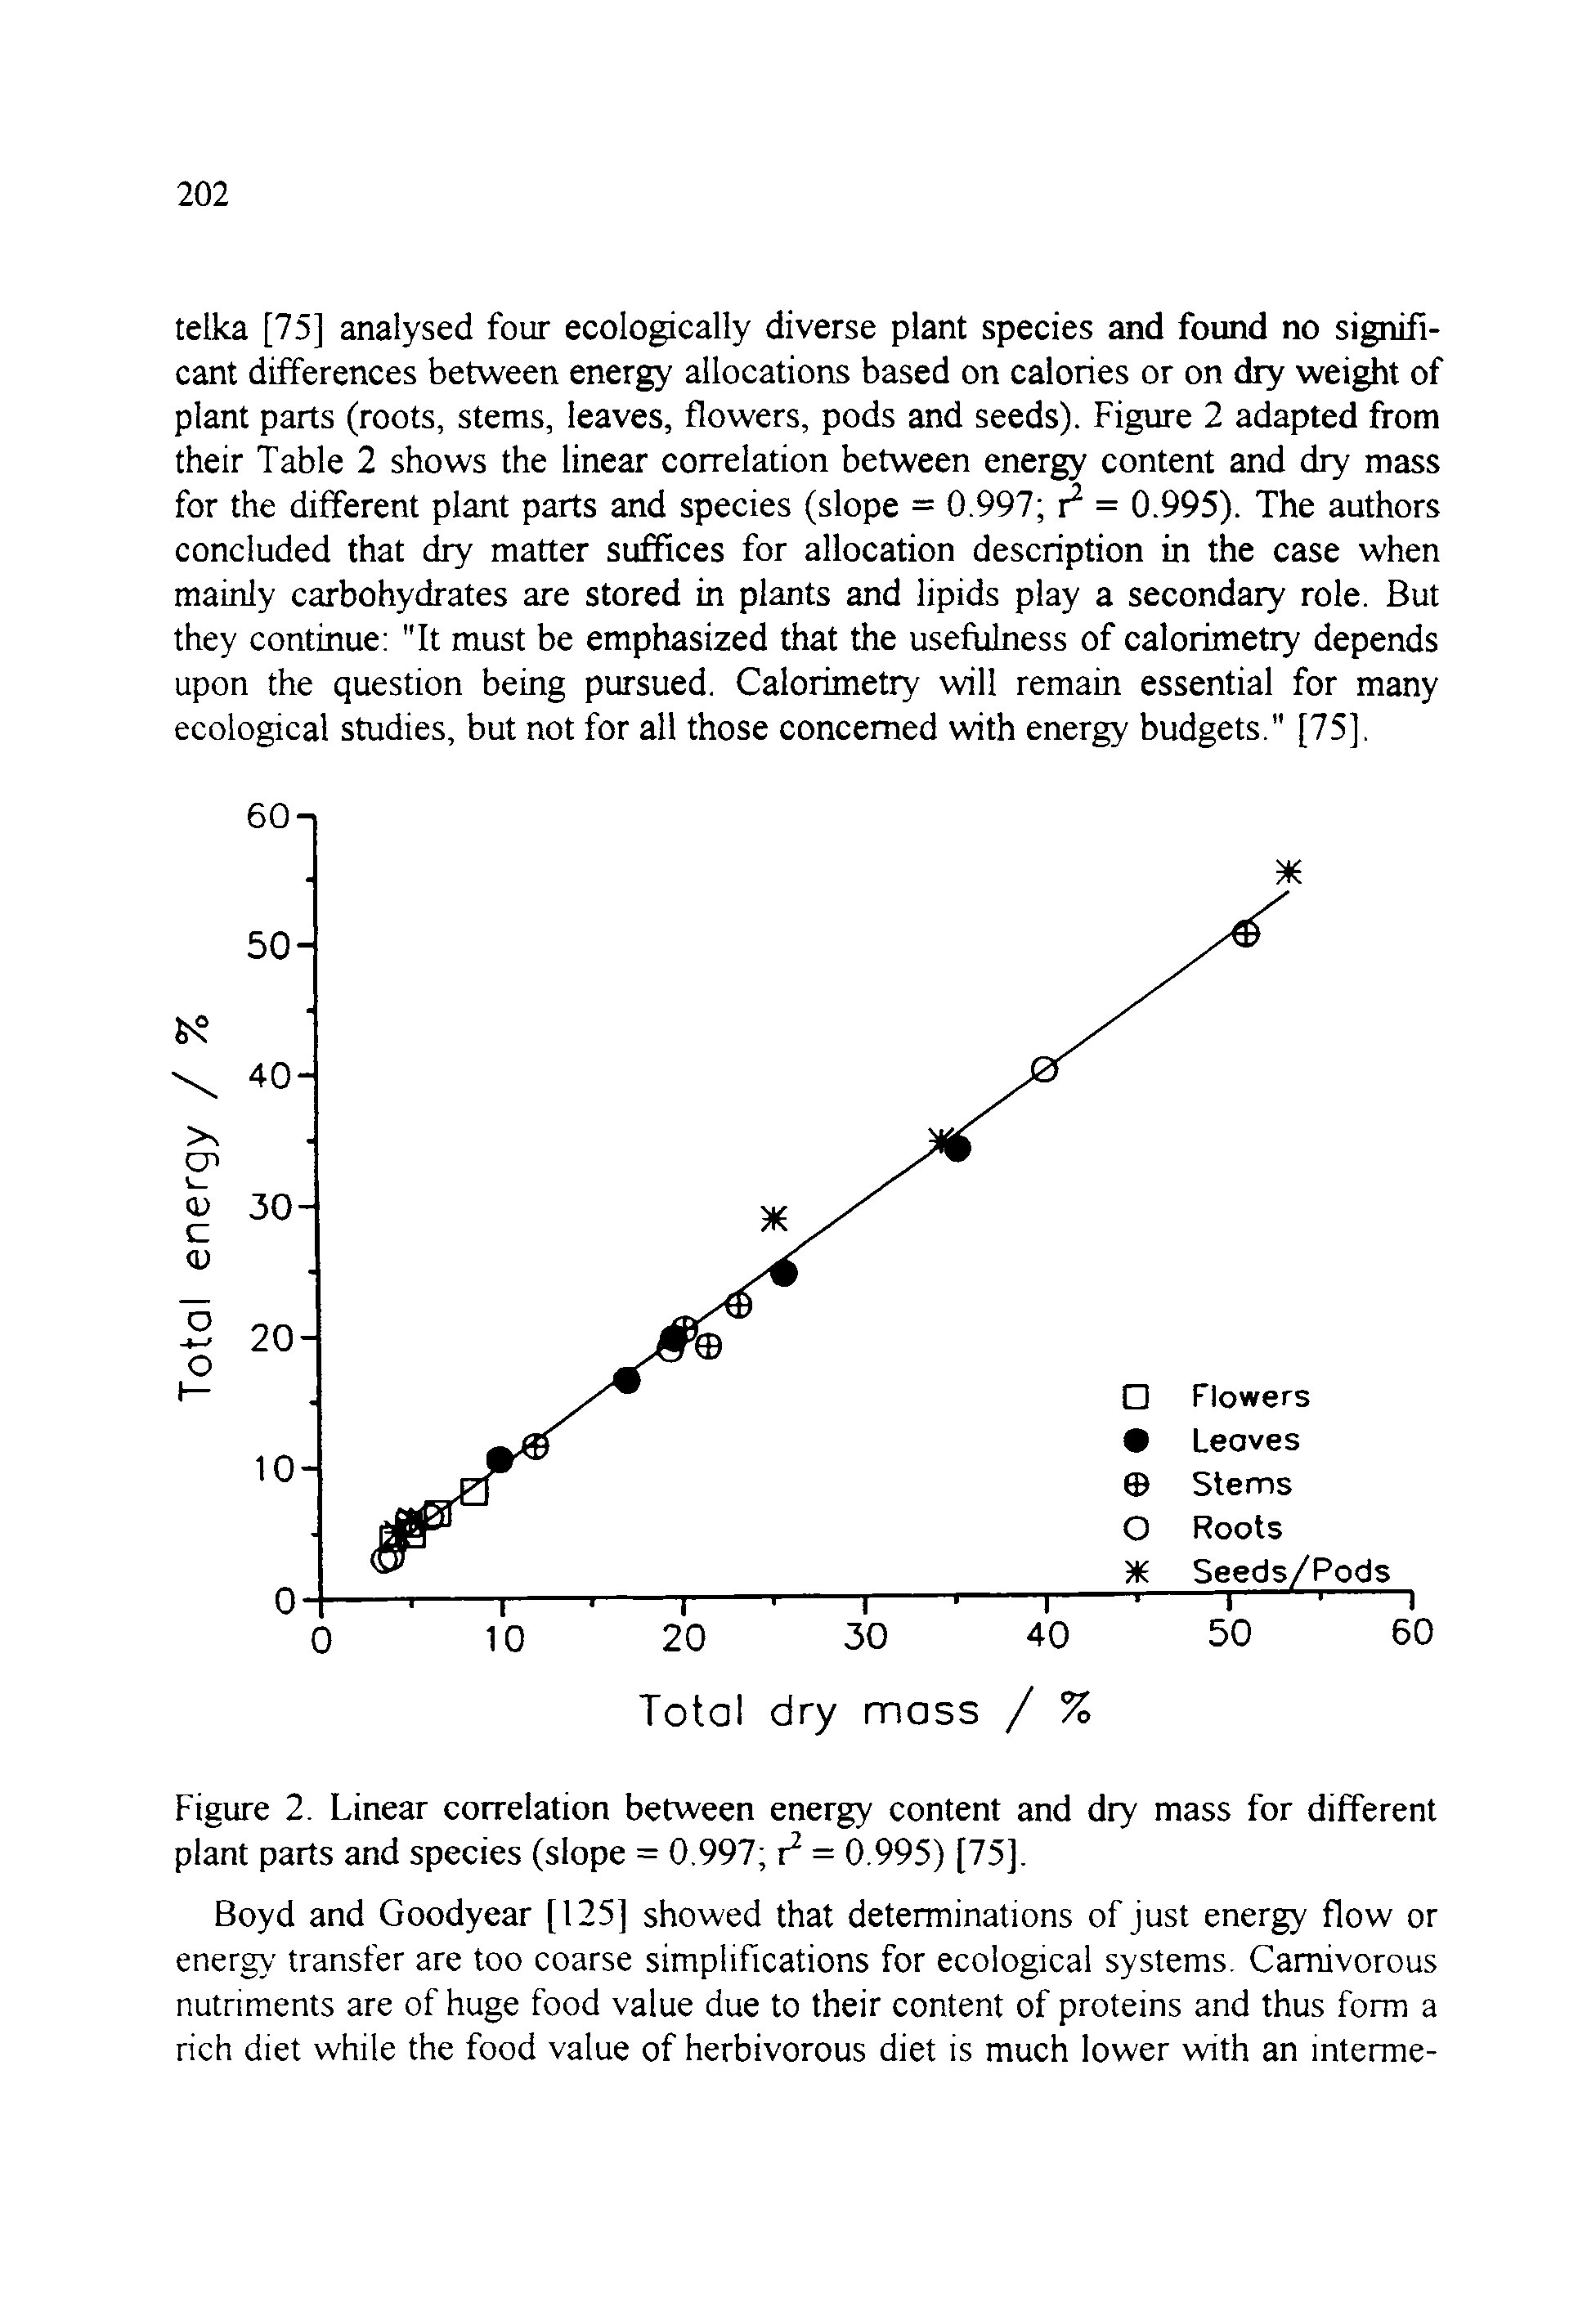 Figure 2. Linear correlation between energy content and dry mass for different plant parts and species (slope = 0.997 r = 0.995) [75].